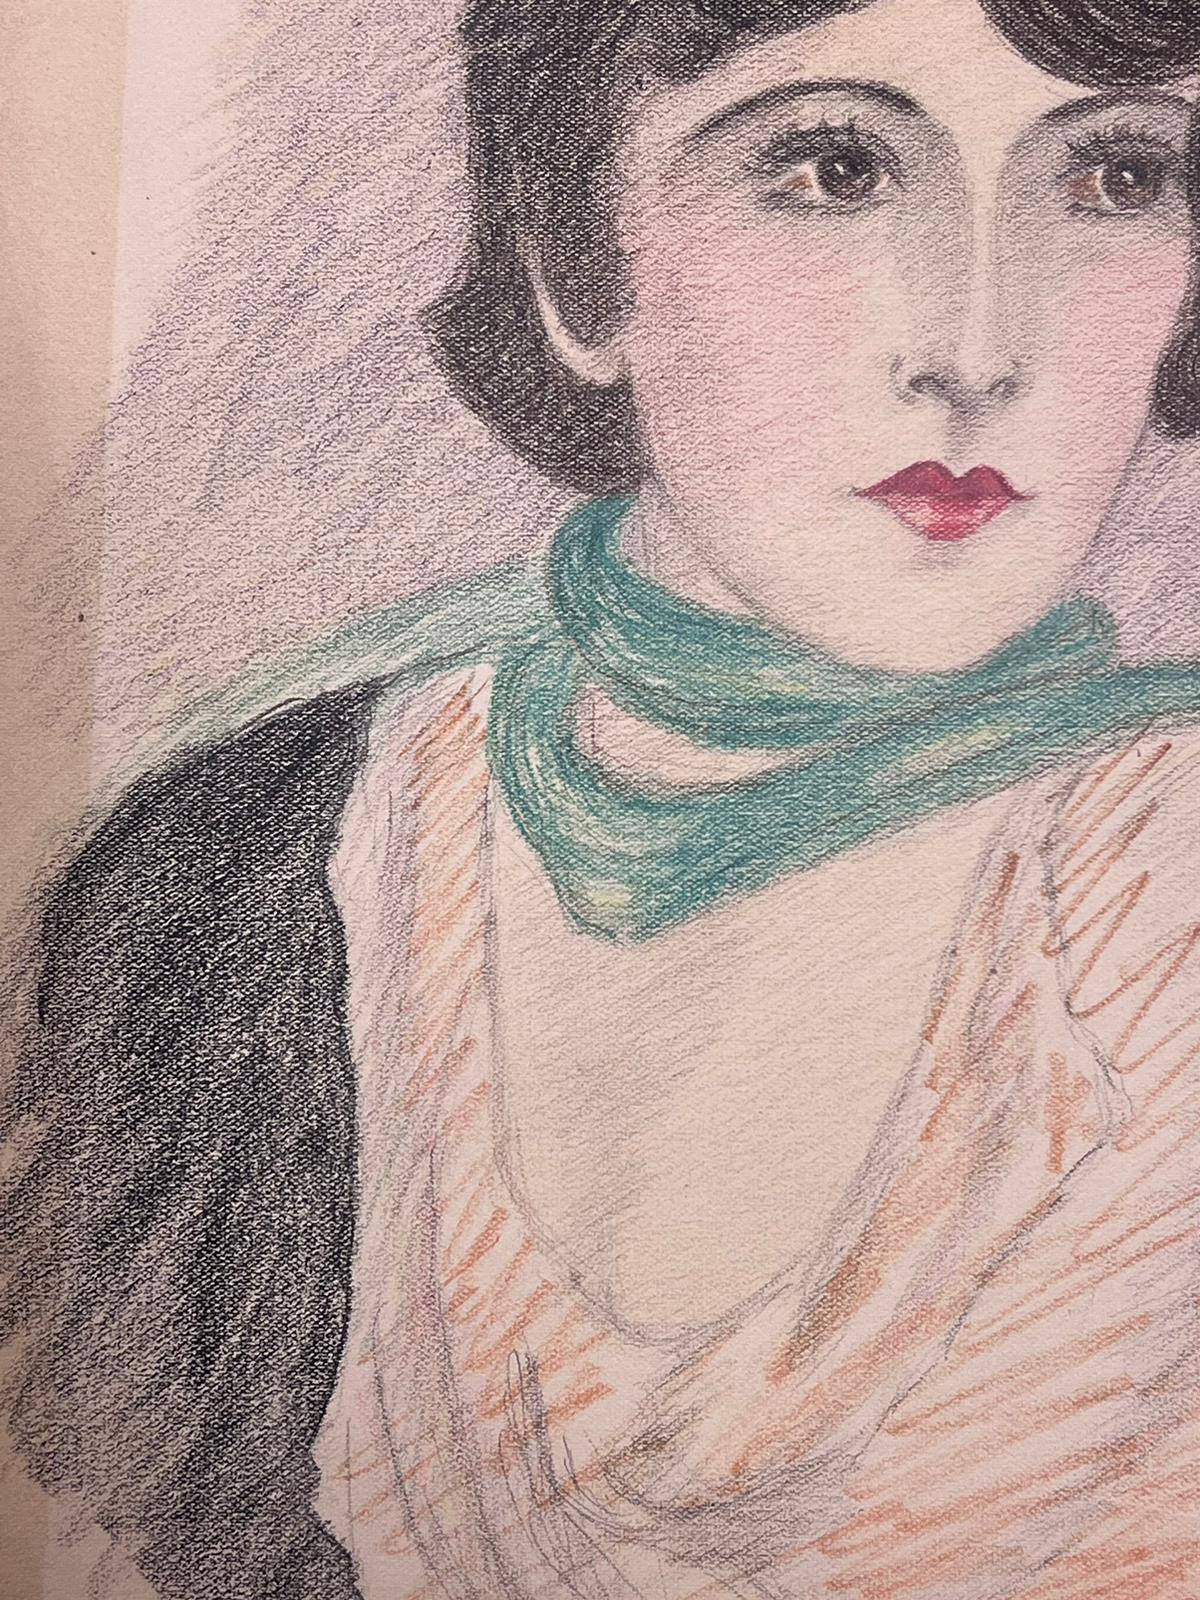 Portrait of an Elegant Lady
original pencil drawing on paper
by Marjorie Schiele (1913-2008) *see notes below
signed
piece of paper is 12 x 9.5 inches
In good condition, though with minor old stains as all old paper does.
provenance: from a private